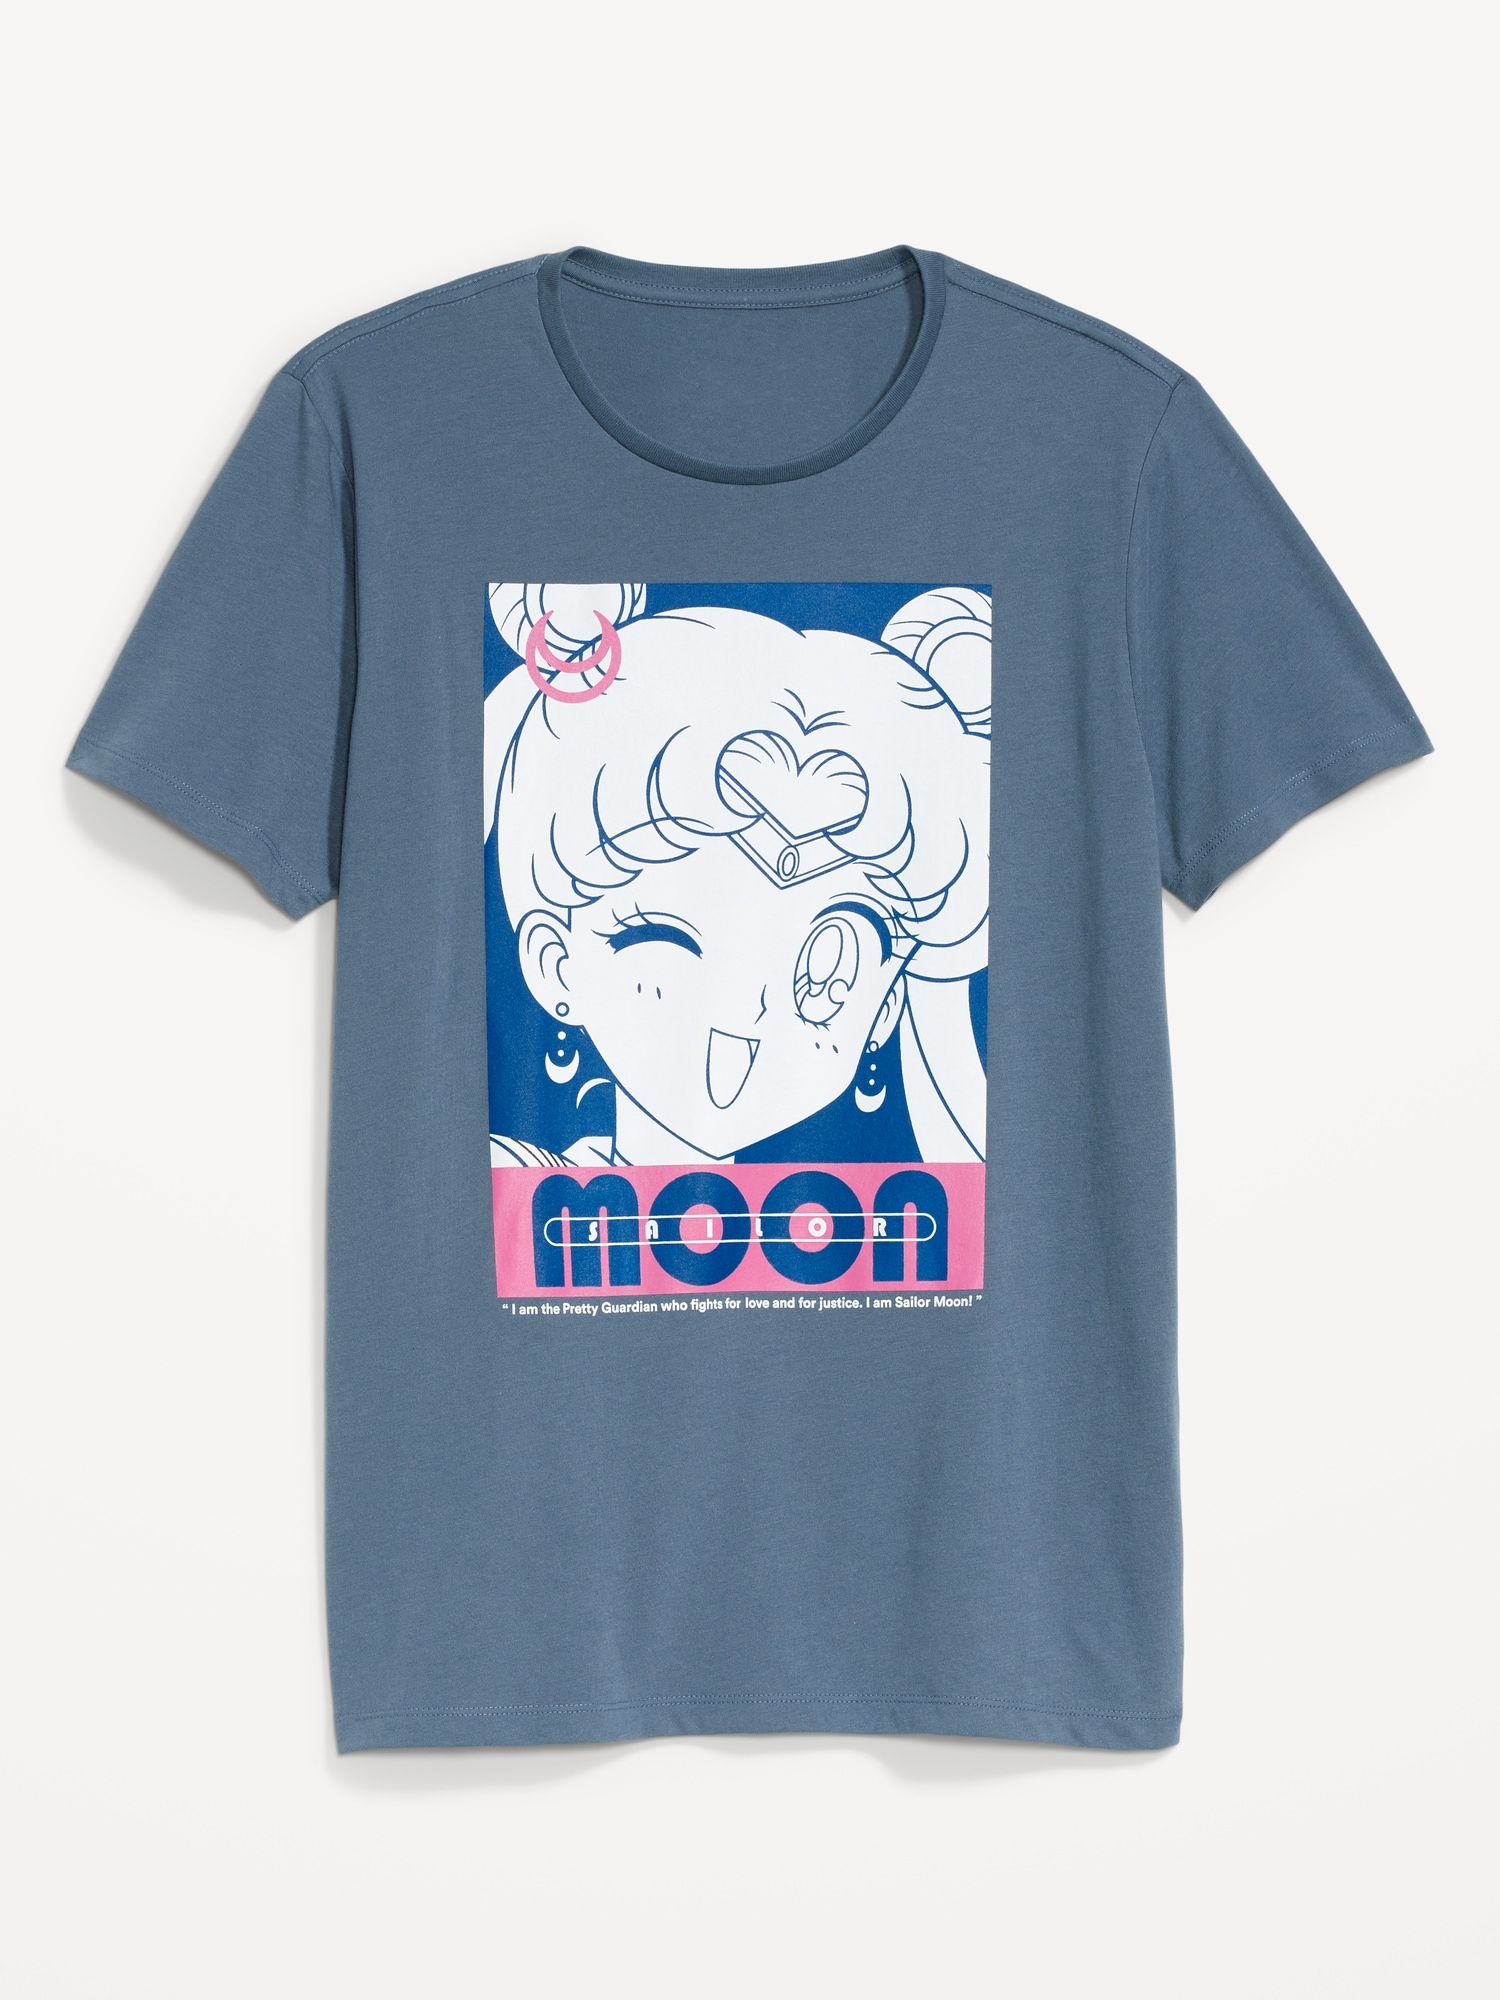 Old Navy: Sailor Moon Gender-Neutral Graphic T-Shirt